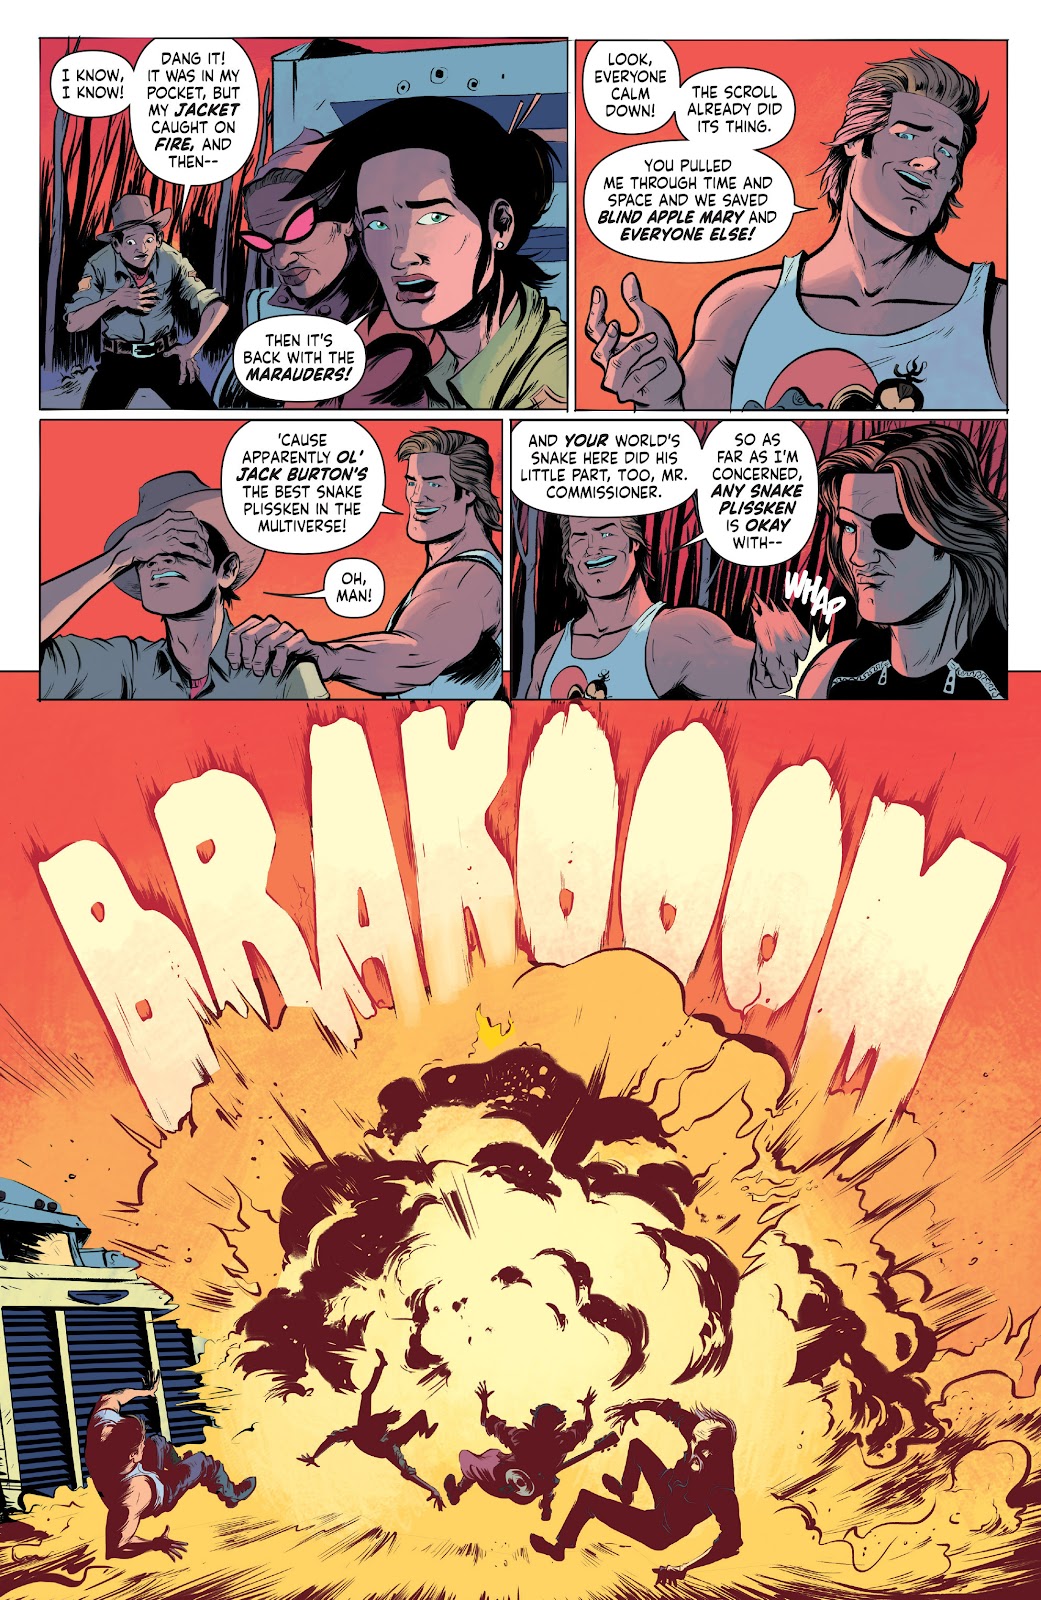 Big Trouble in Little China / Escape from New York issue 3 - Page 6